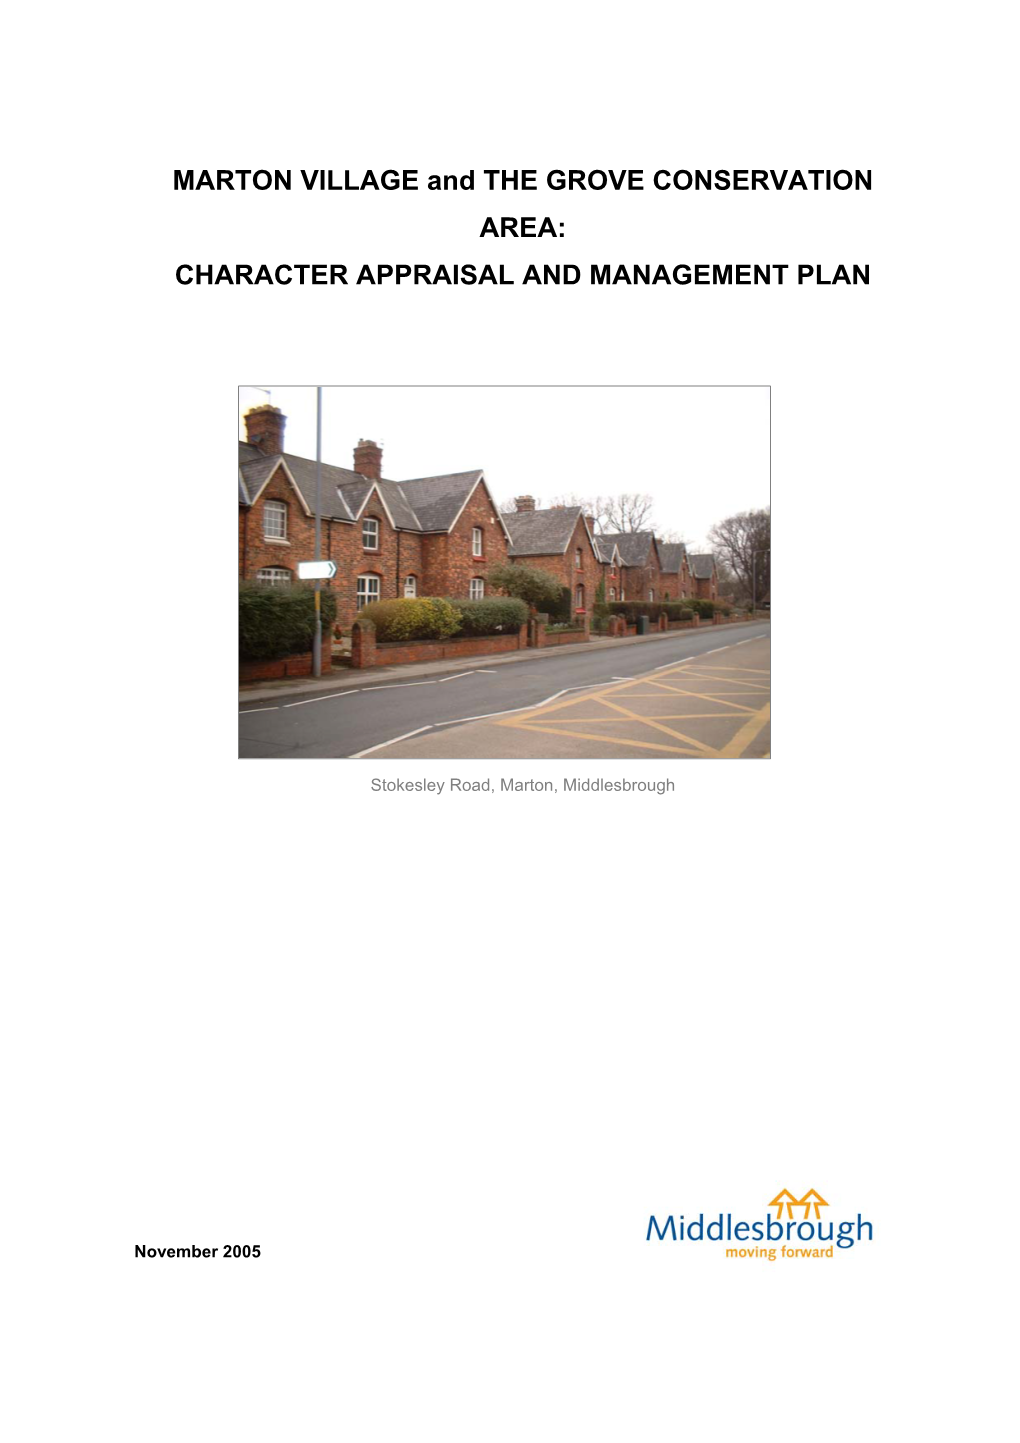 MARTON VILLAGE and the GROVE CONSERVATION AREA: CHARACTER APPRAISAL and MANAGEMENT PLAN